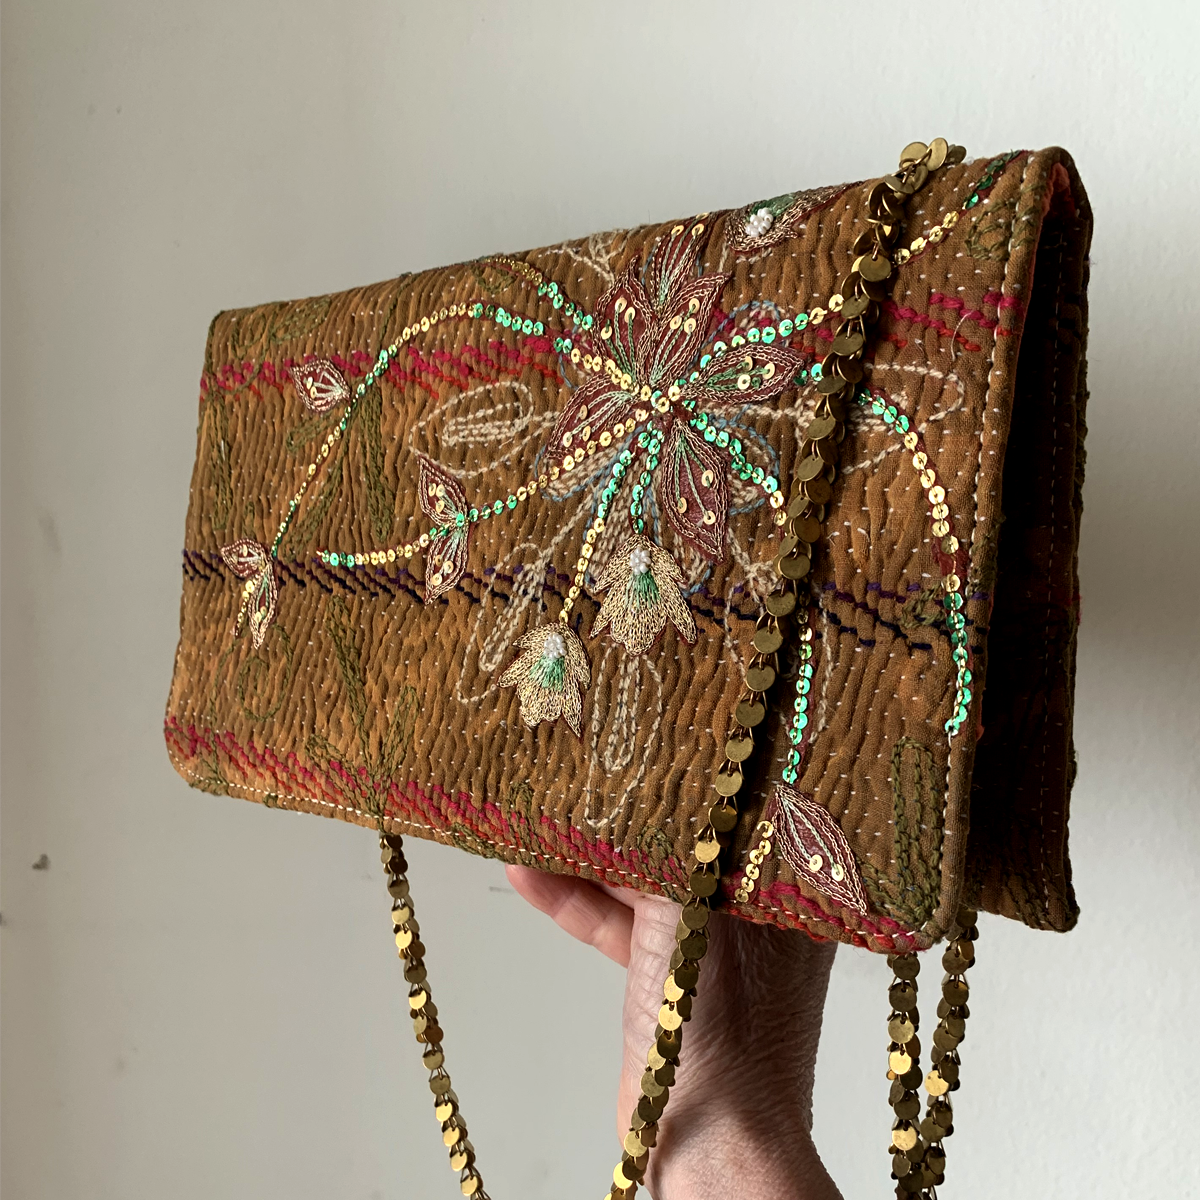 Vintage Blooms: A Clutch of Joy and Story